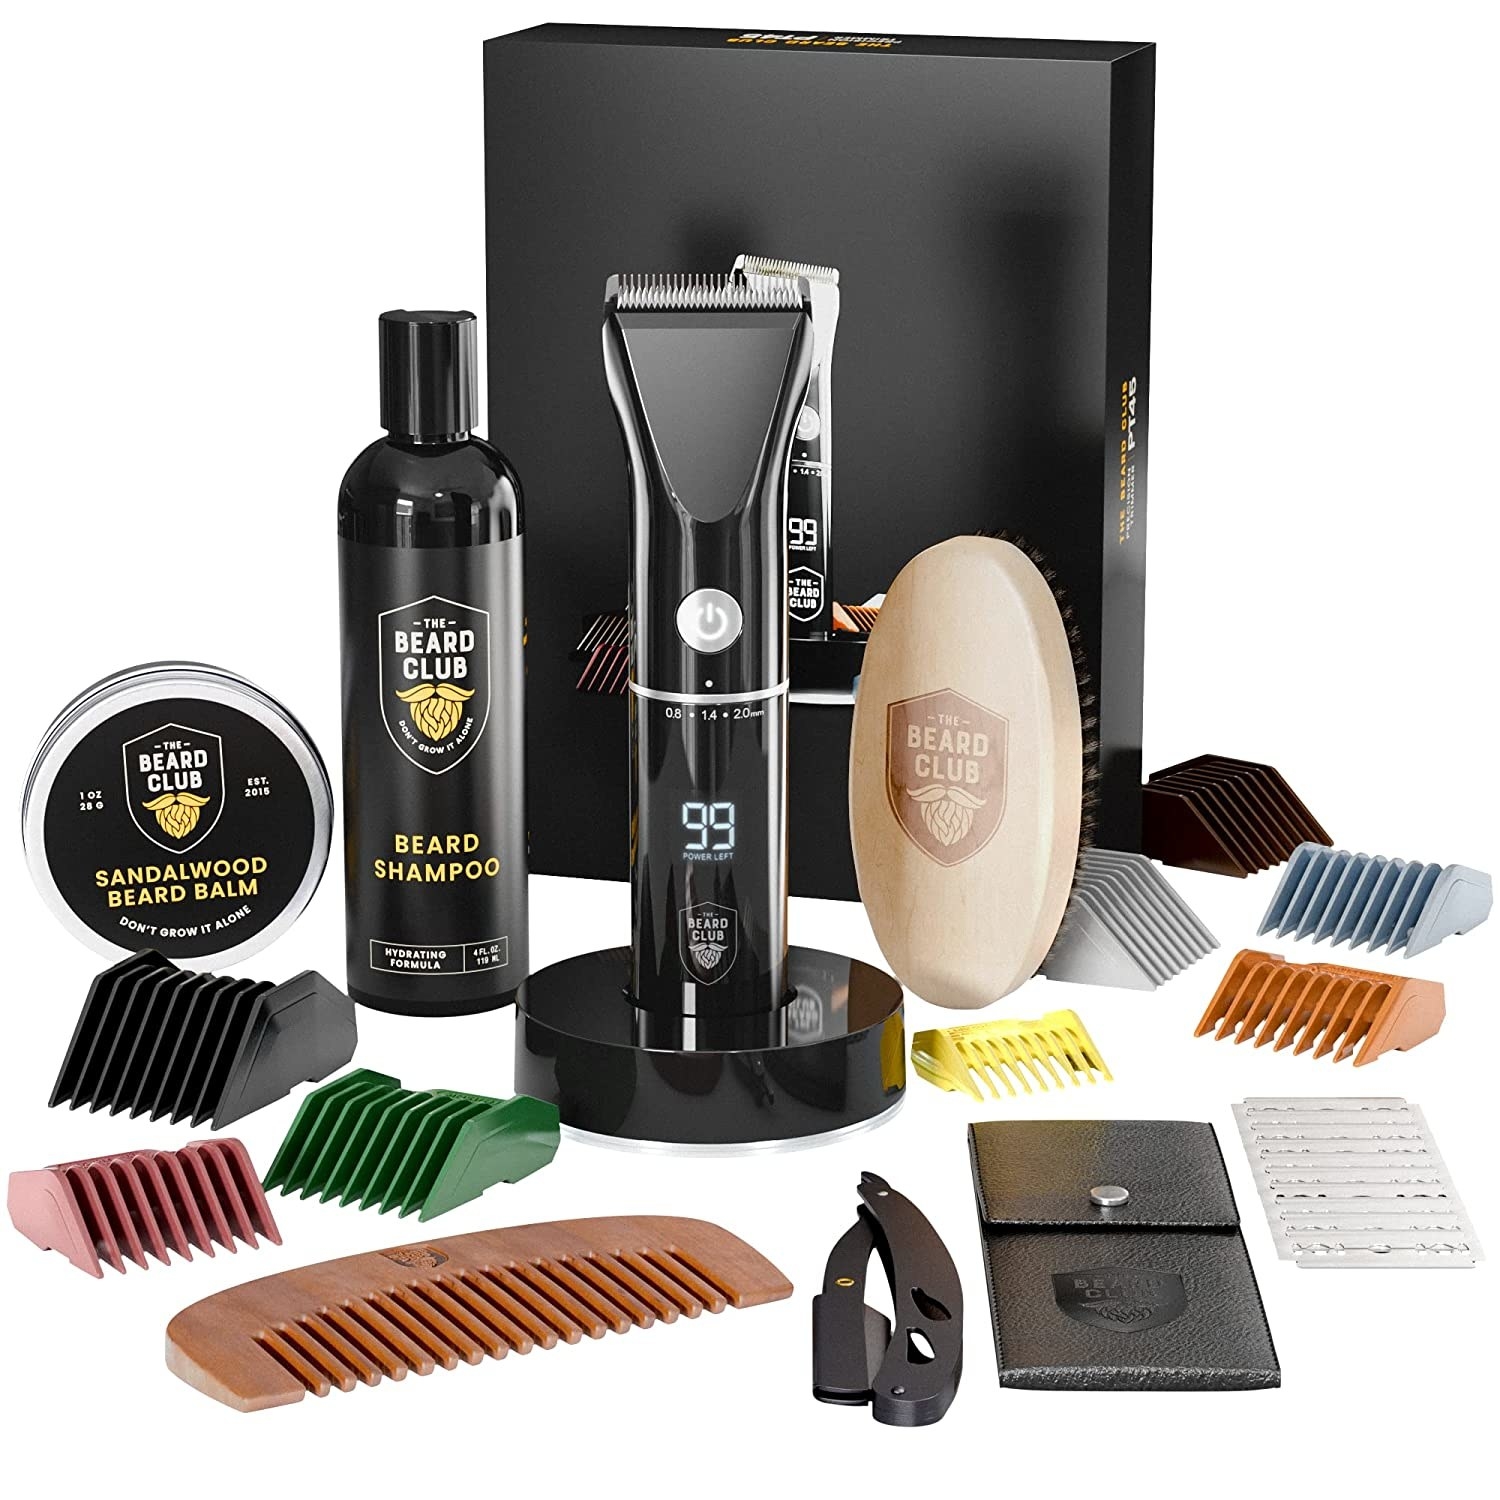 the grooming kit which comes with various guards, a comb, a brush, beard shamppo, beard balm, and more